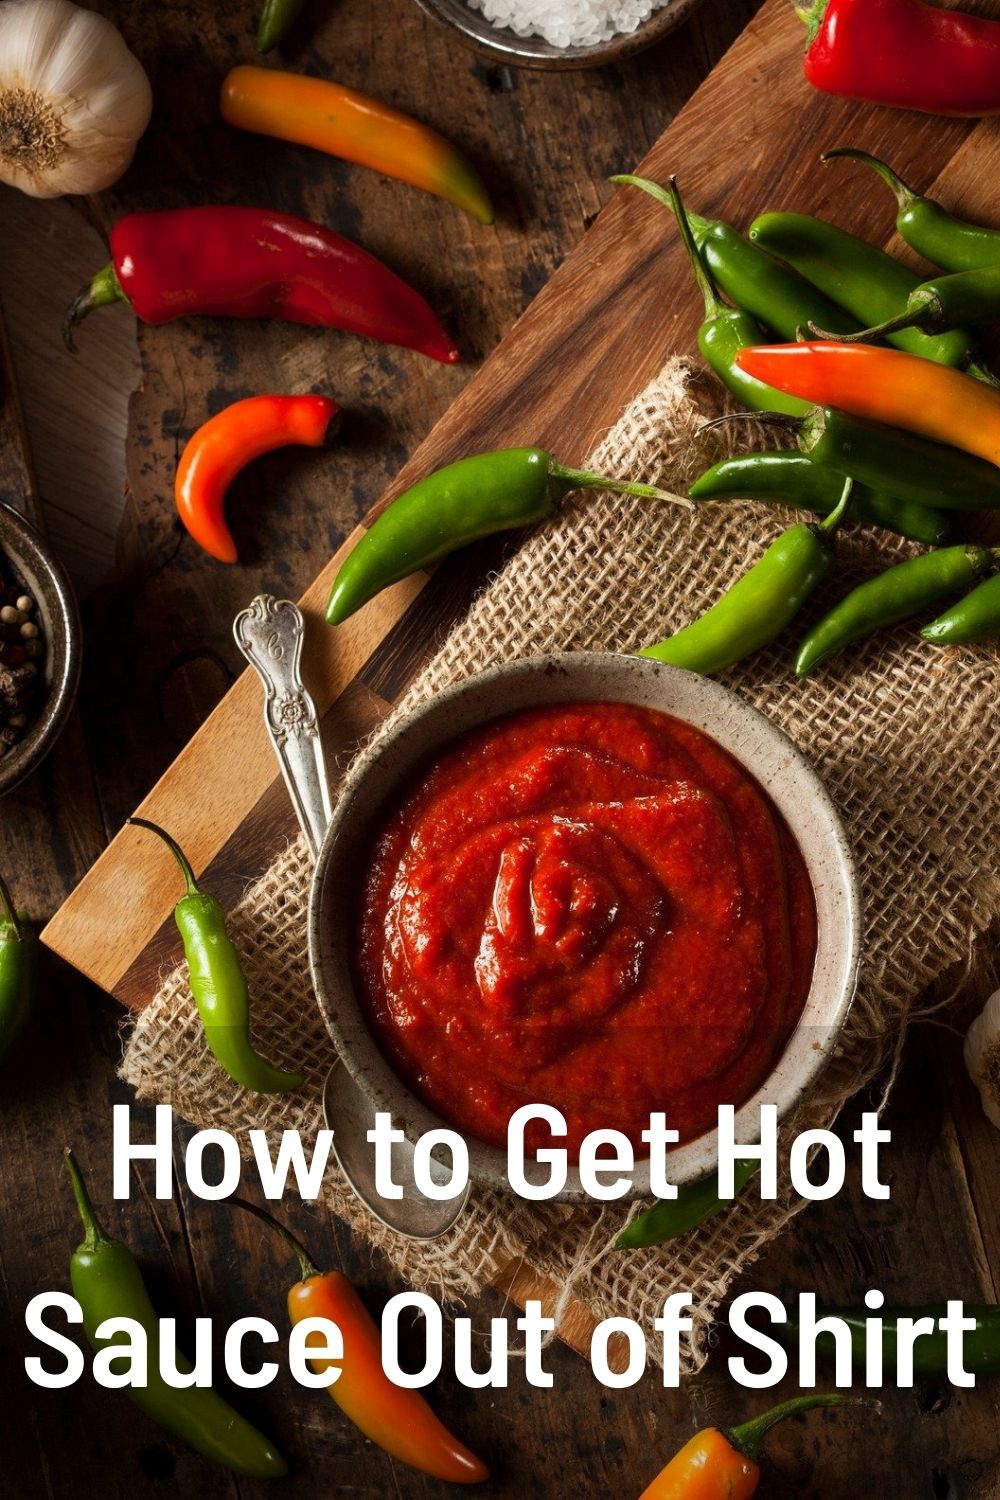 How to Get Hot Sauce Out of Shirt